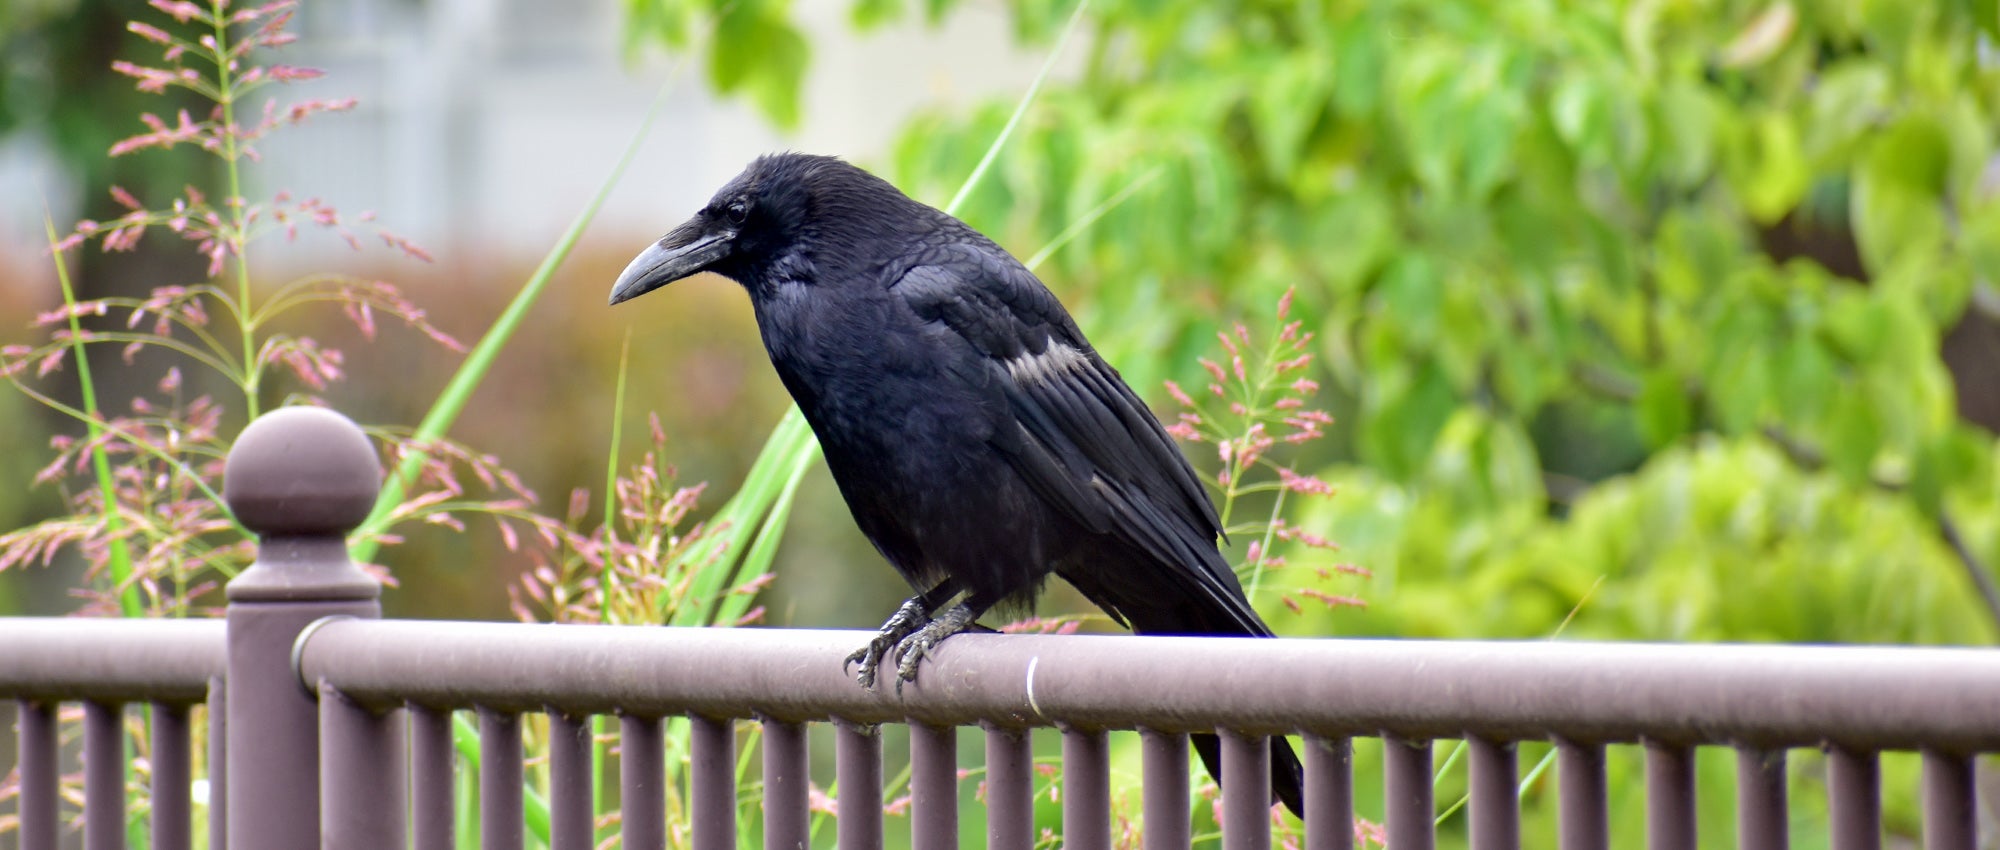 What to do about crows | The Humane Society of the United States